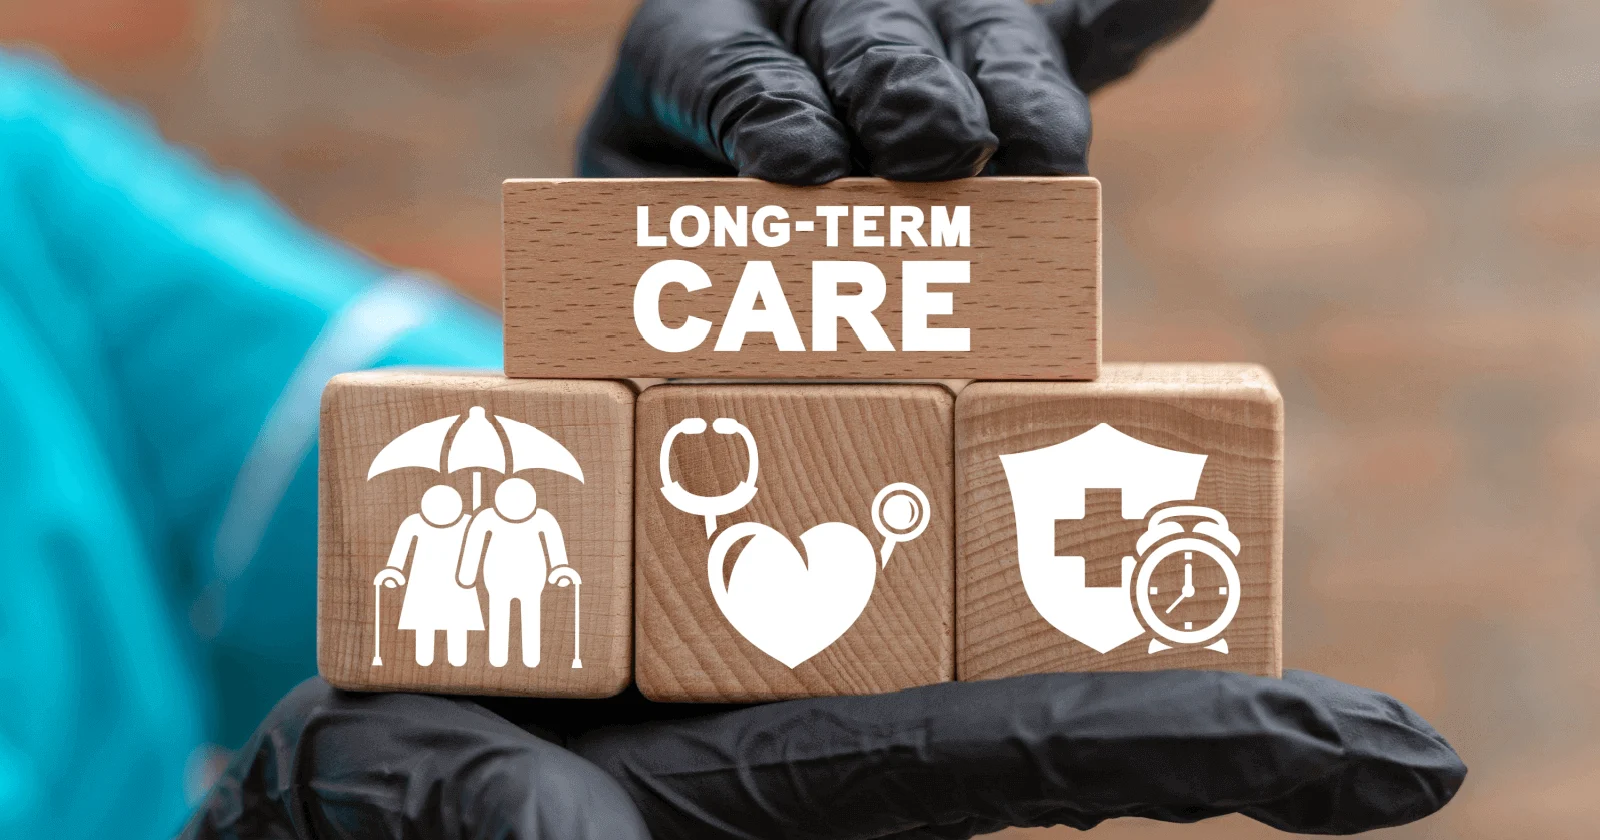 Long-Term Care (LTC) Rider in Life Insurance